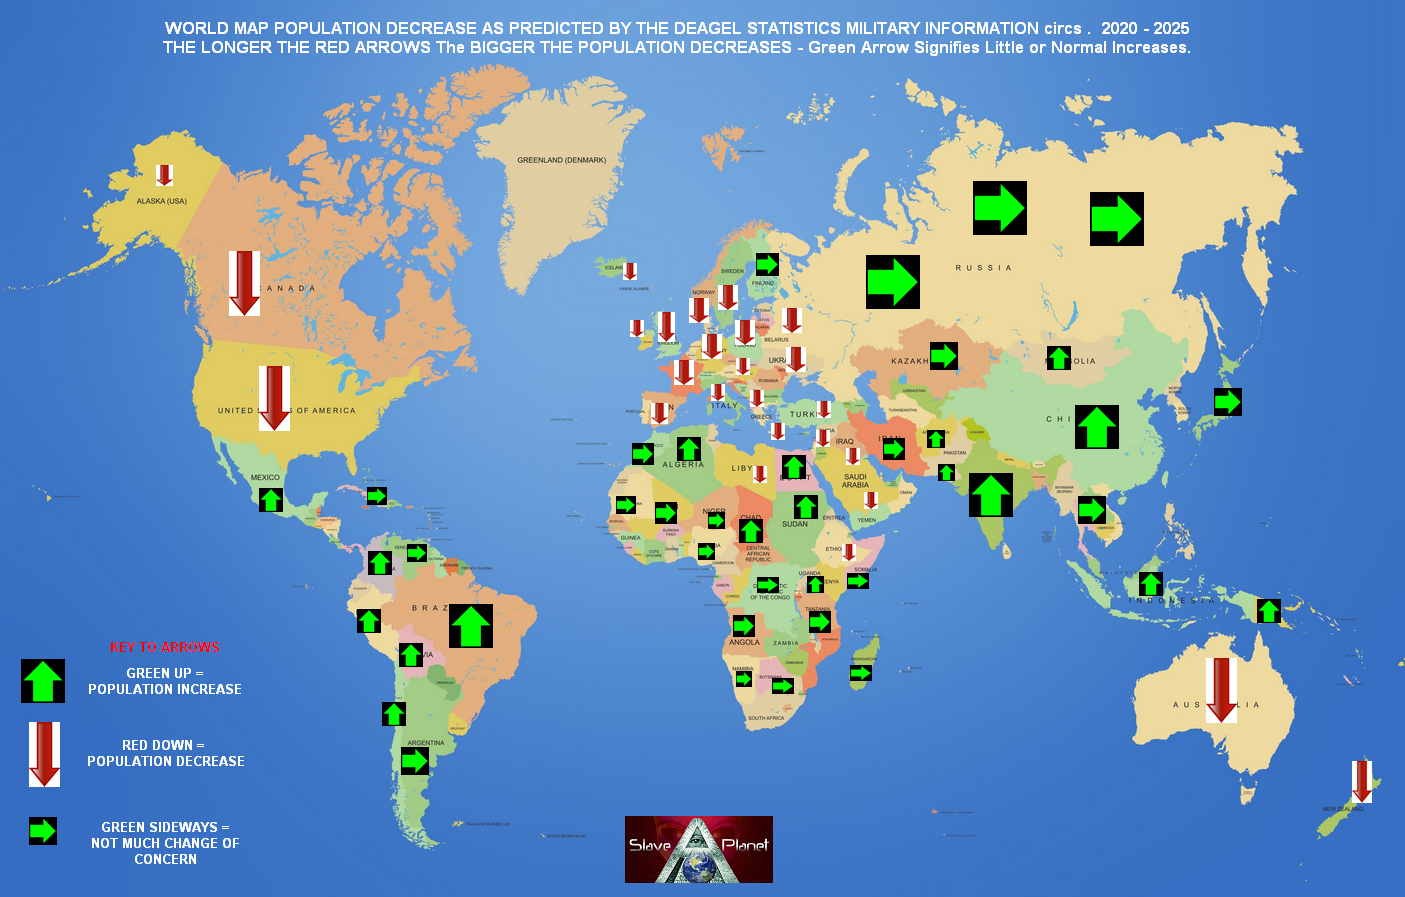 The 2025 WORLD DEPOPULATION MAP as PROJECTED Deagel Military Experts Website HOT TOPIC